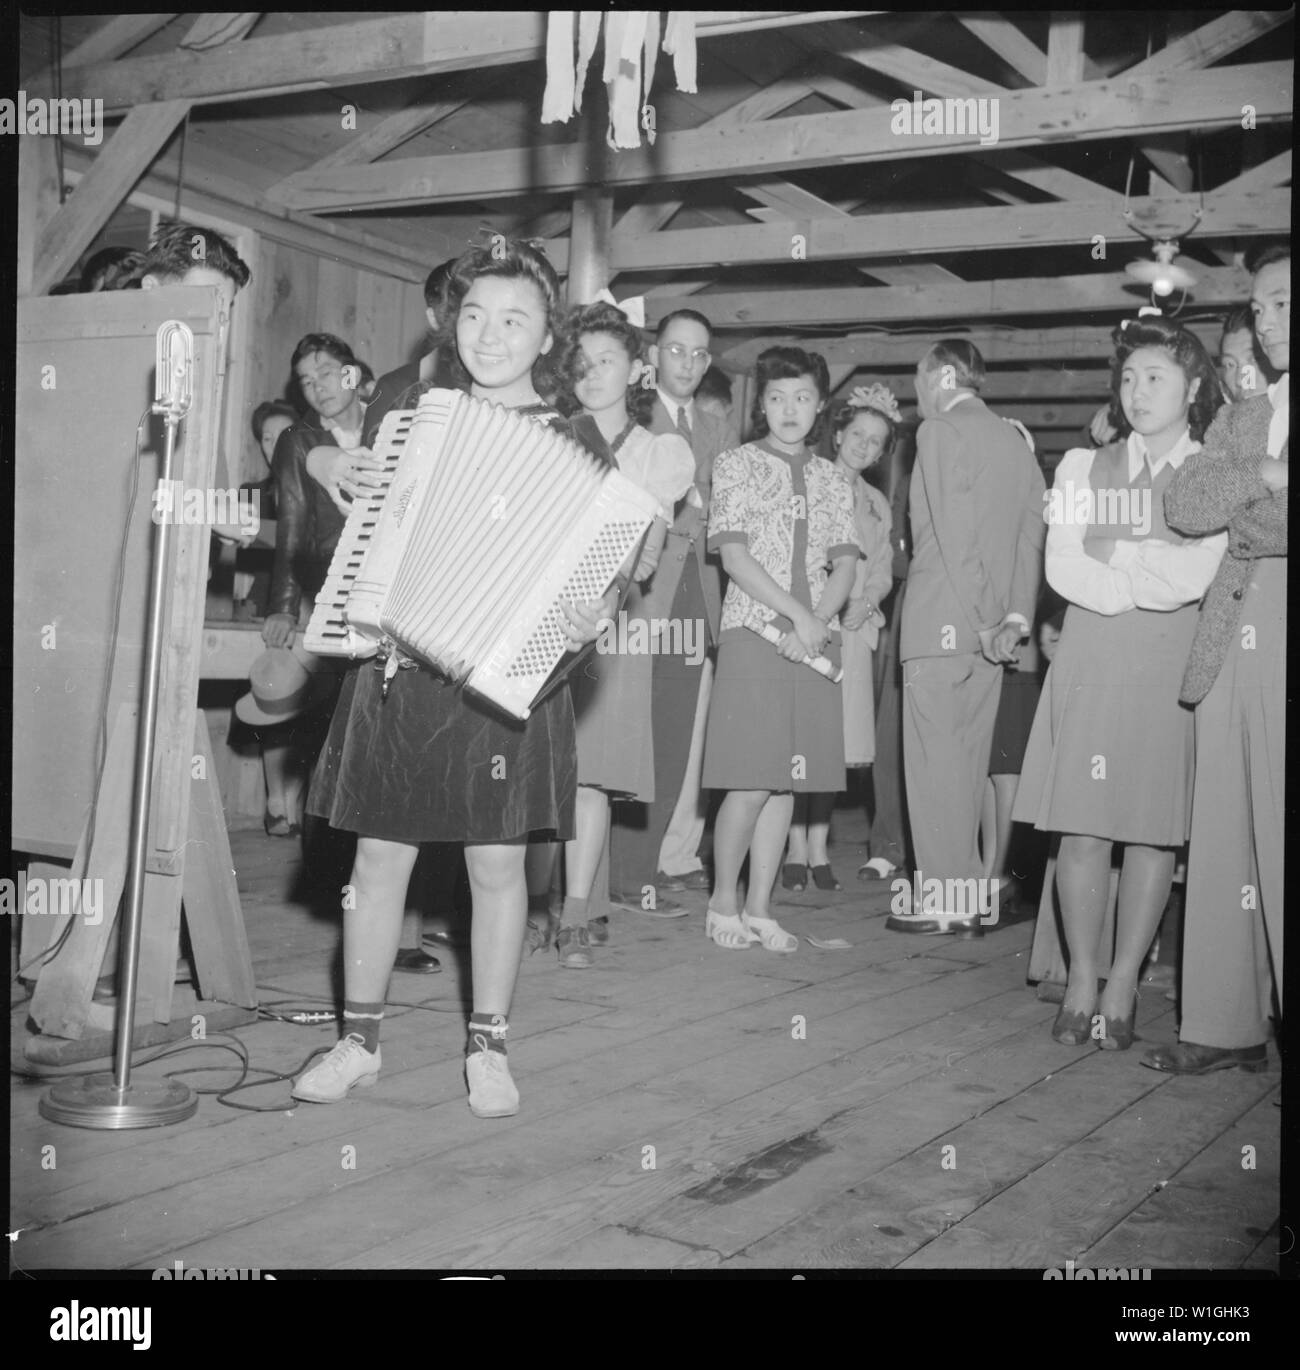 Manzanar Relocation Center, Manzanar, California. A young evacuee of Japanese ancestry entertains o . . .; Scope and content:  The full caption for this photograph reads: Manzanar Relocation Center, Manzanar, California. A young evacuee of Japanese ancestry entertains on an accordion at a dance given by the Girls' Relocation Committee for fellow evacuees. Stock Photo